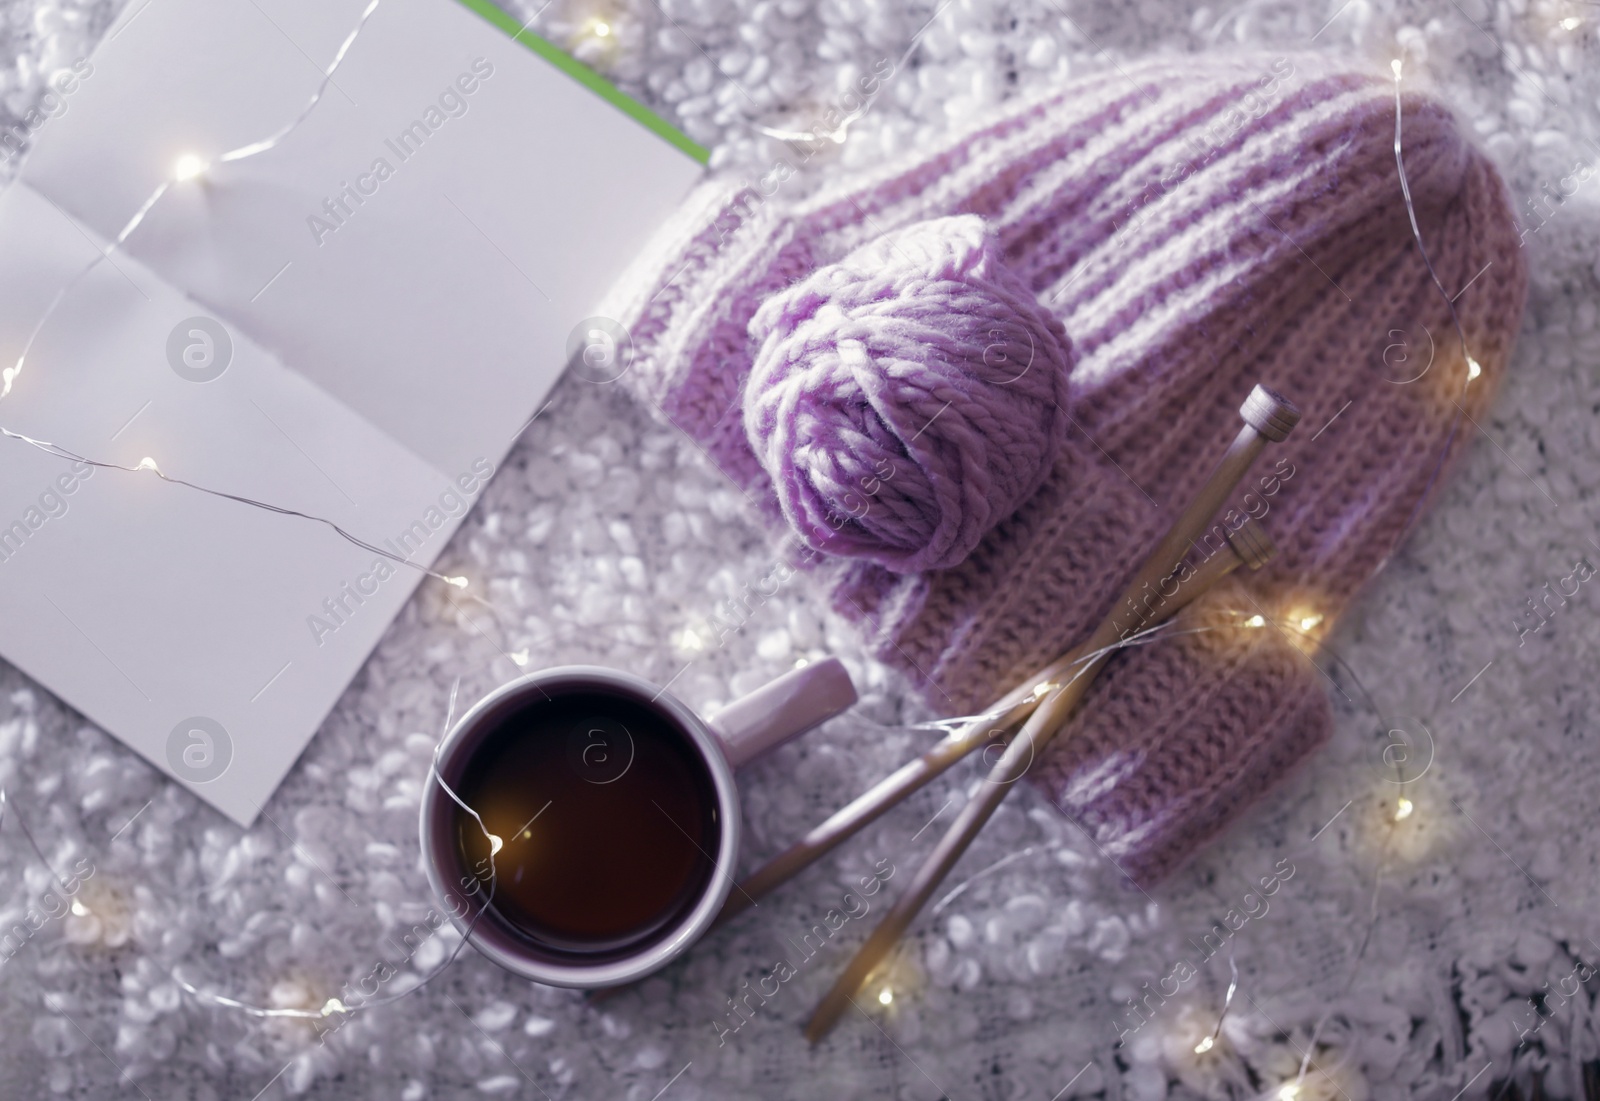 Photo of Flat lay composition with cup of hot beverage, knitting yarn and book on fuzzy rug. Winter evening